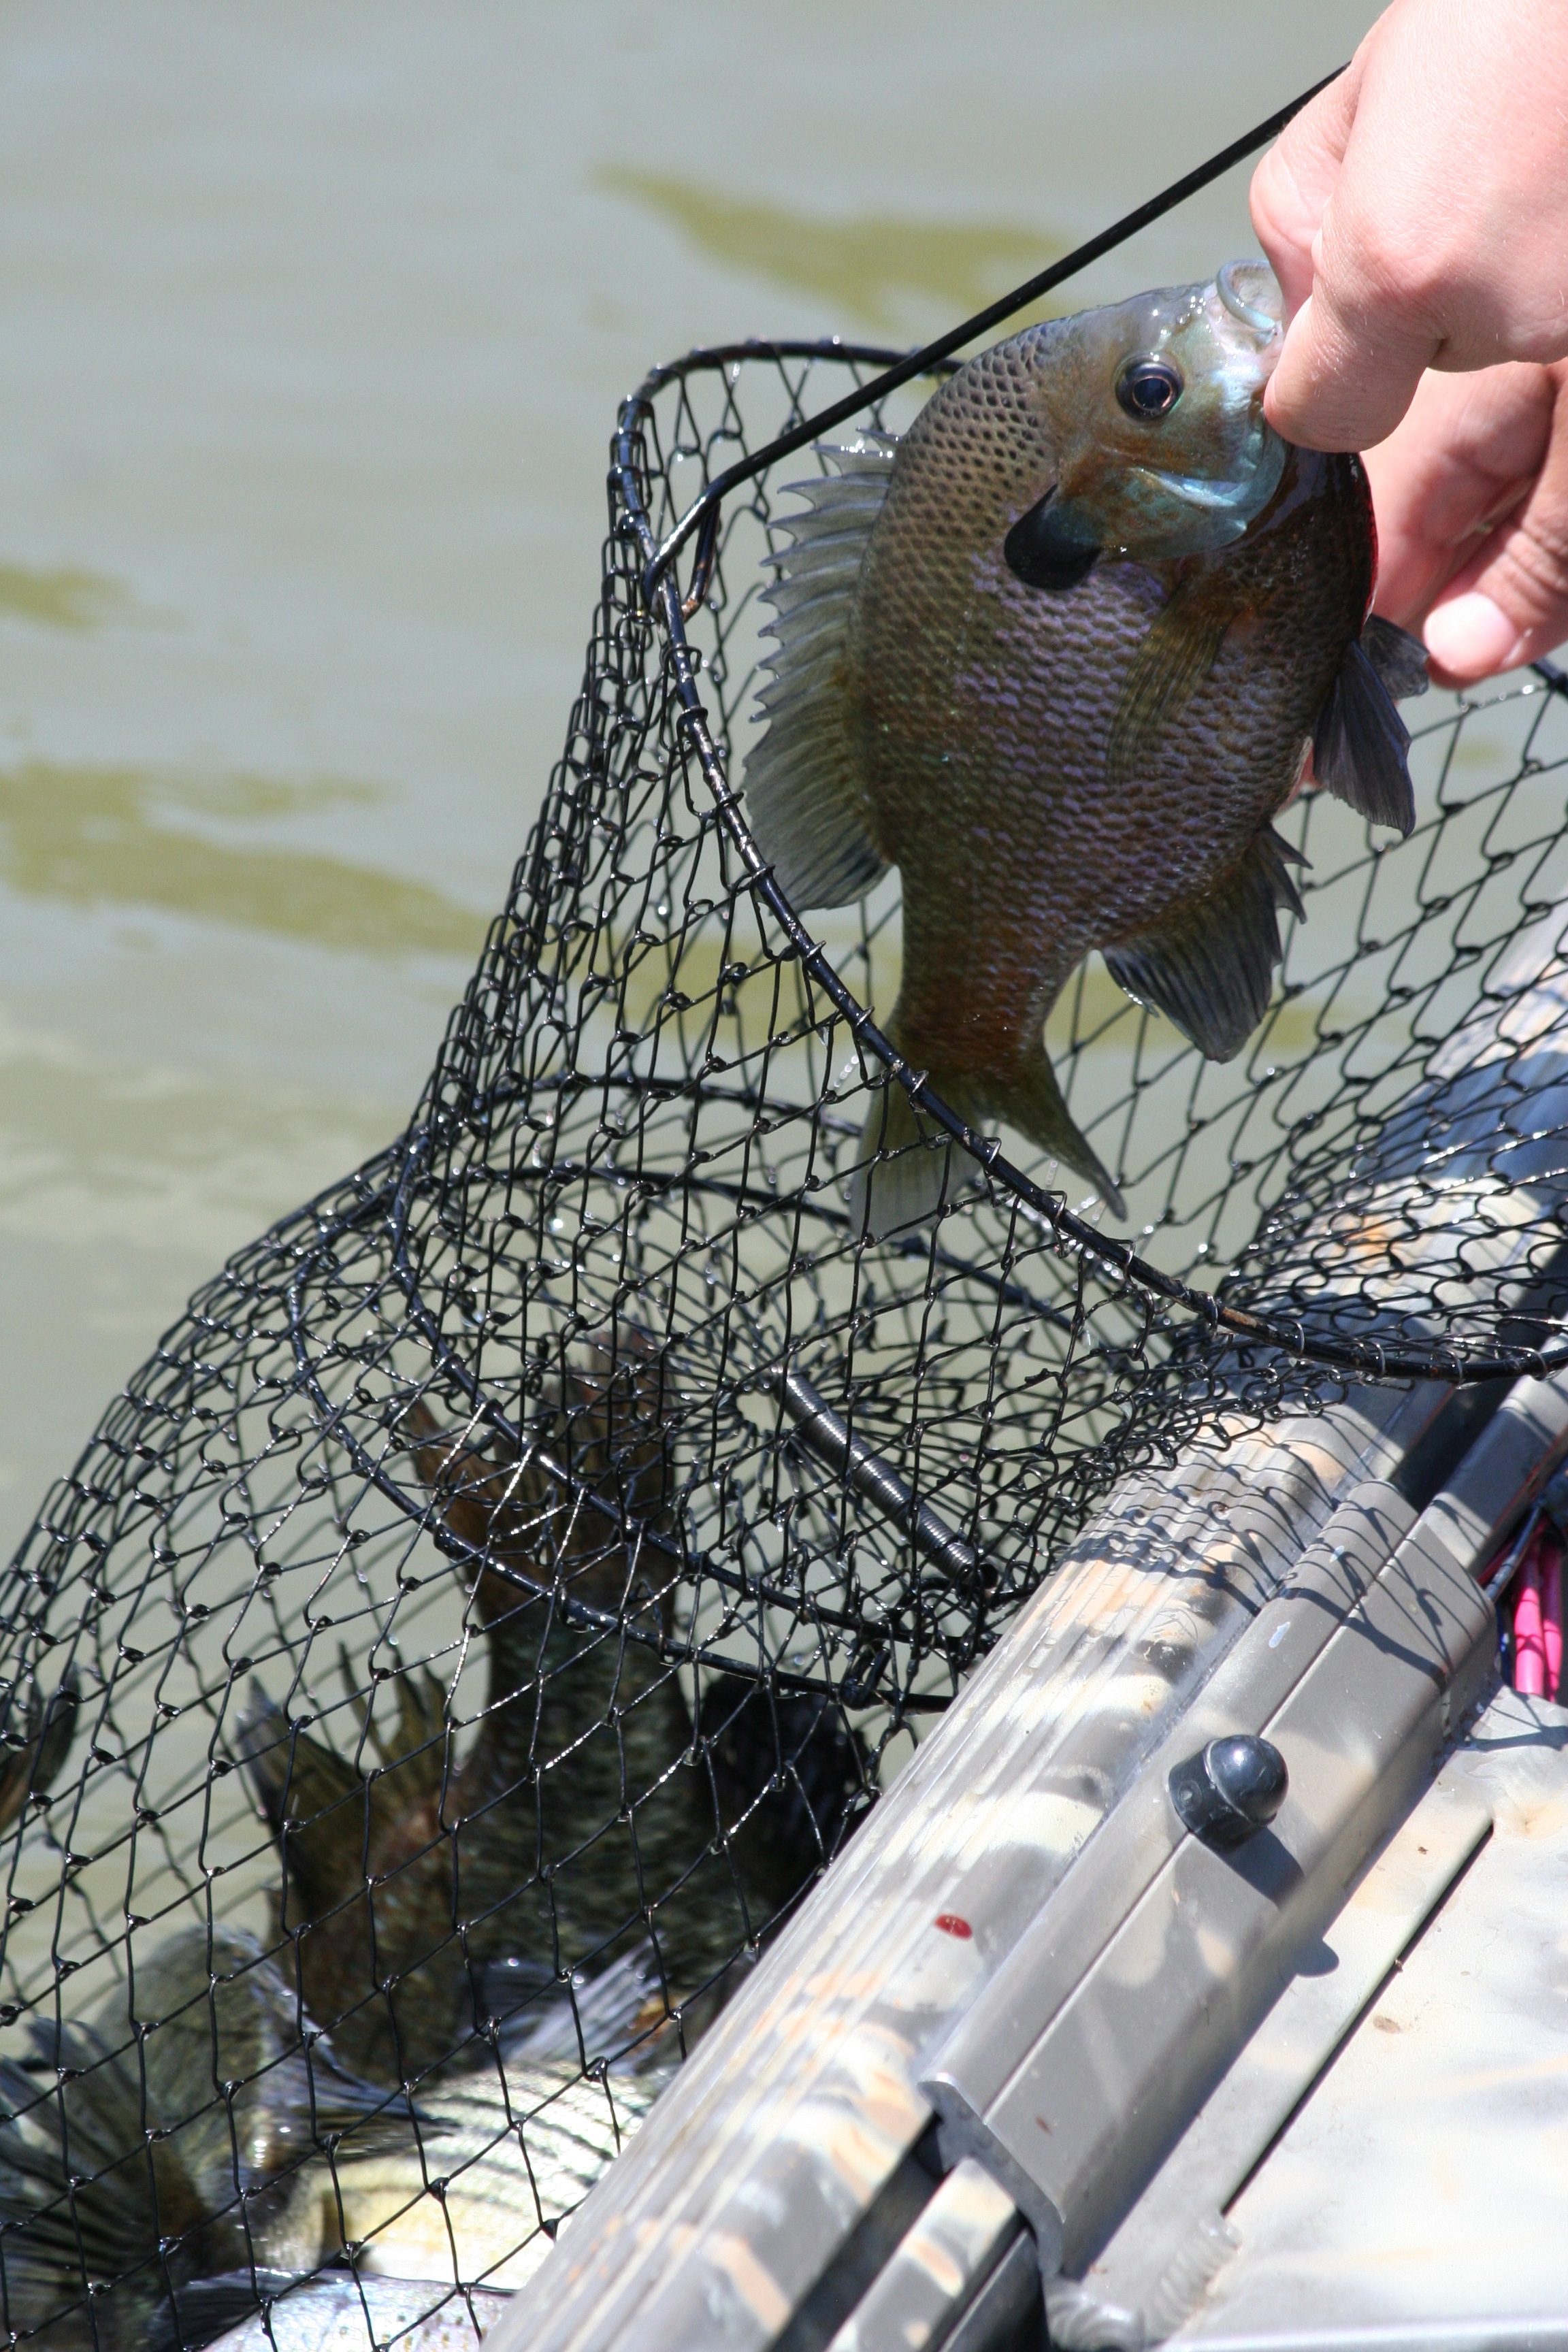 An angler drops another bluegill in the basket during an outing in May.